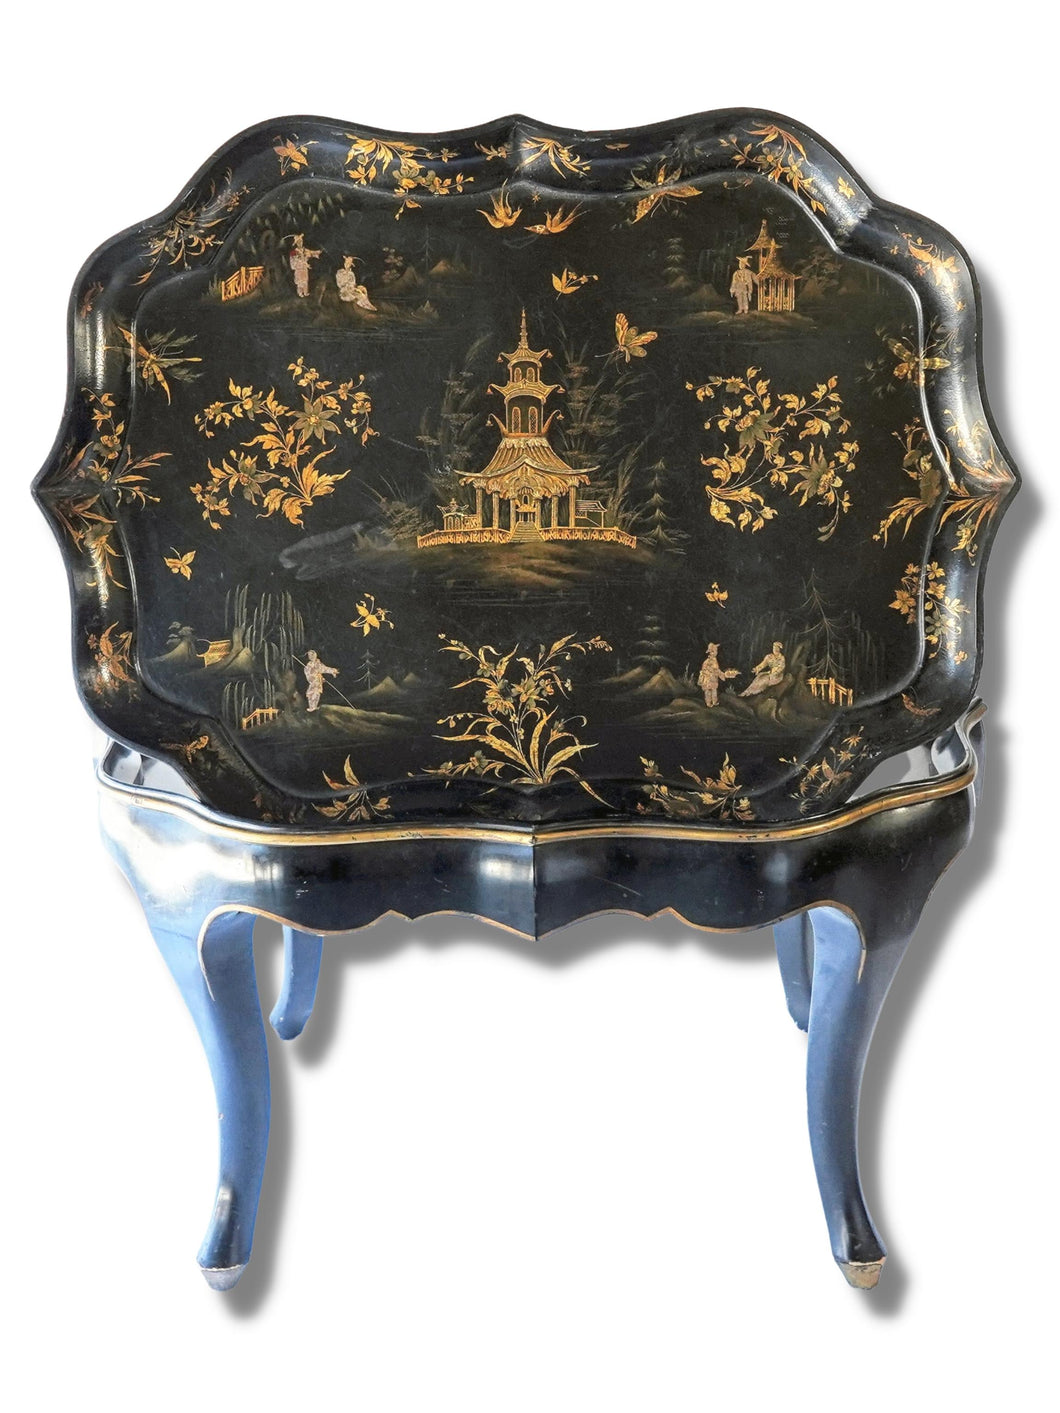 Antique Papier-Maché Chinoiserie Tray Table